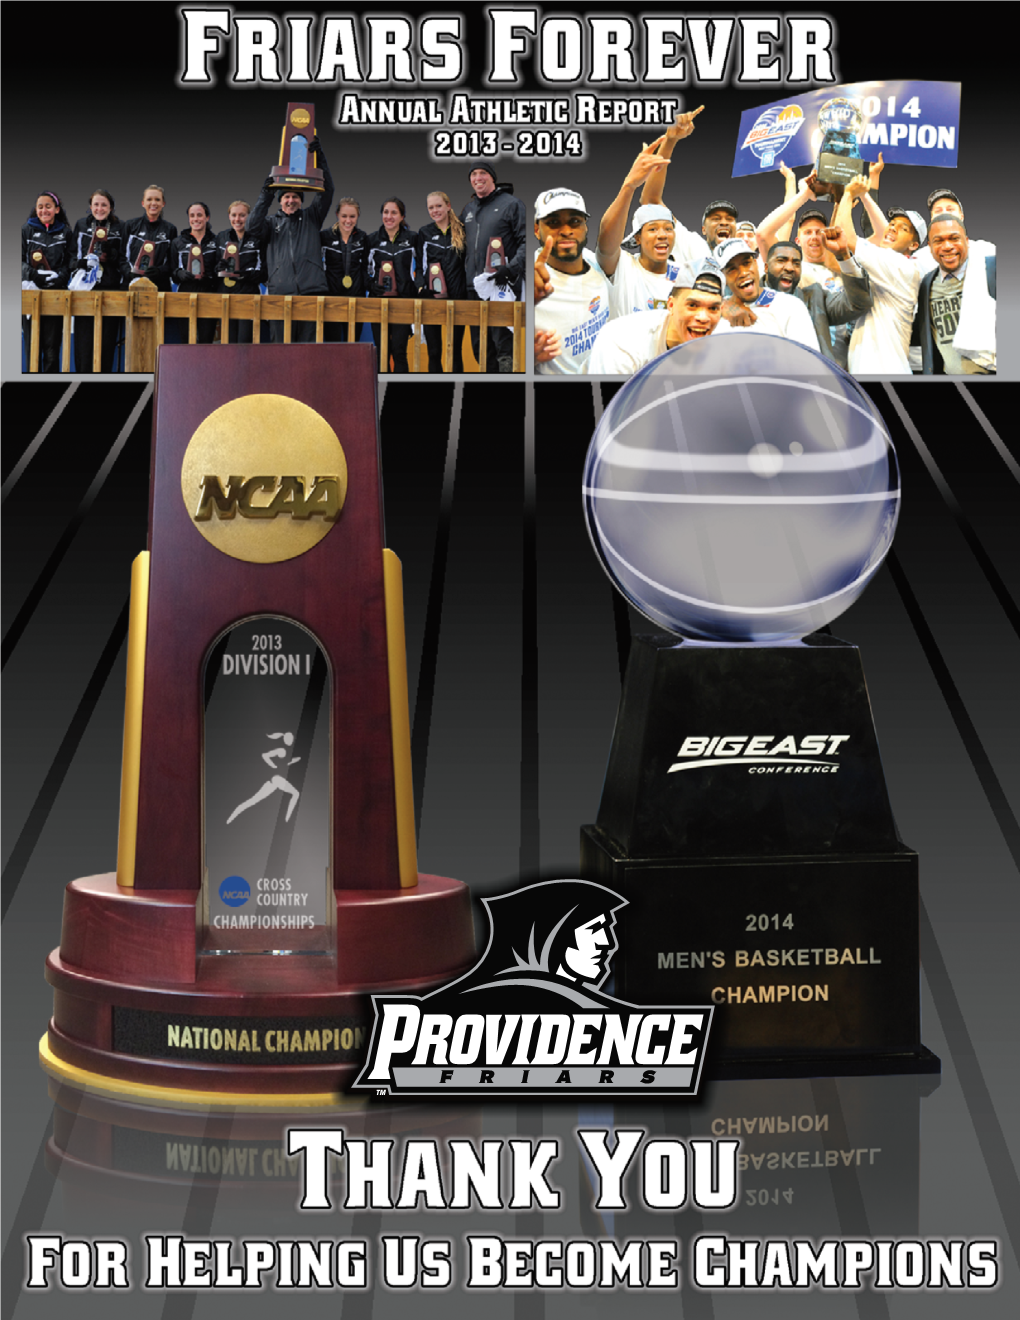 2013-2014 Marks the Sixth Consecutive Year That the National Grid Foundation Has Teamed up with Providence College Athletics for This Program